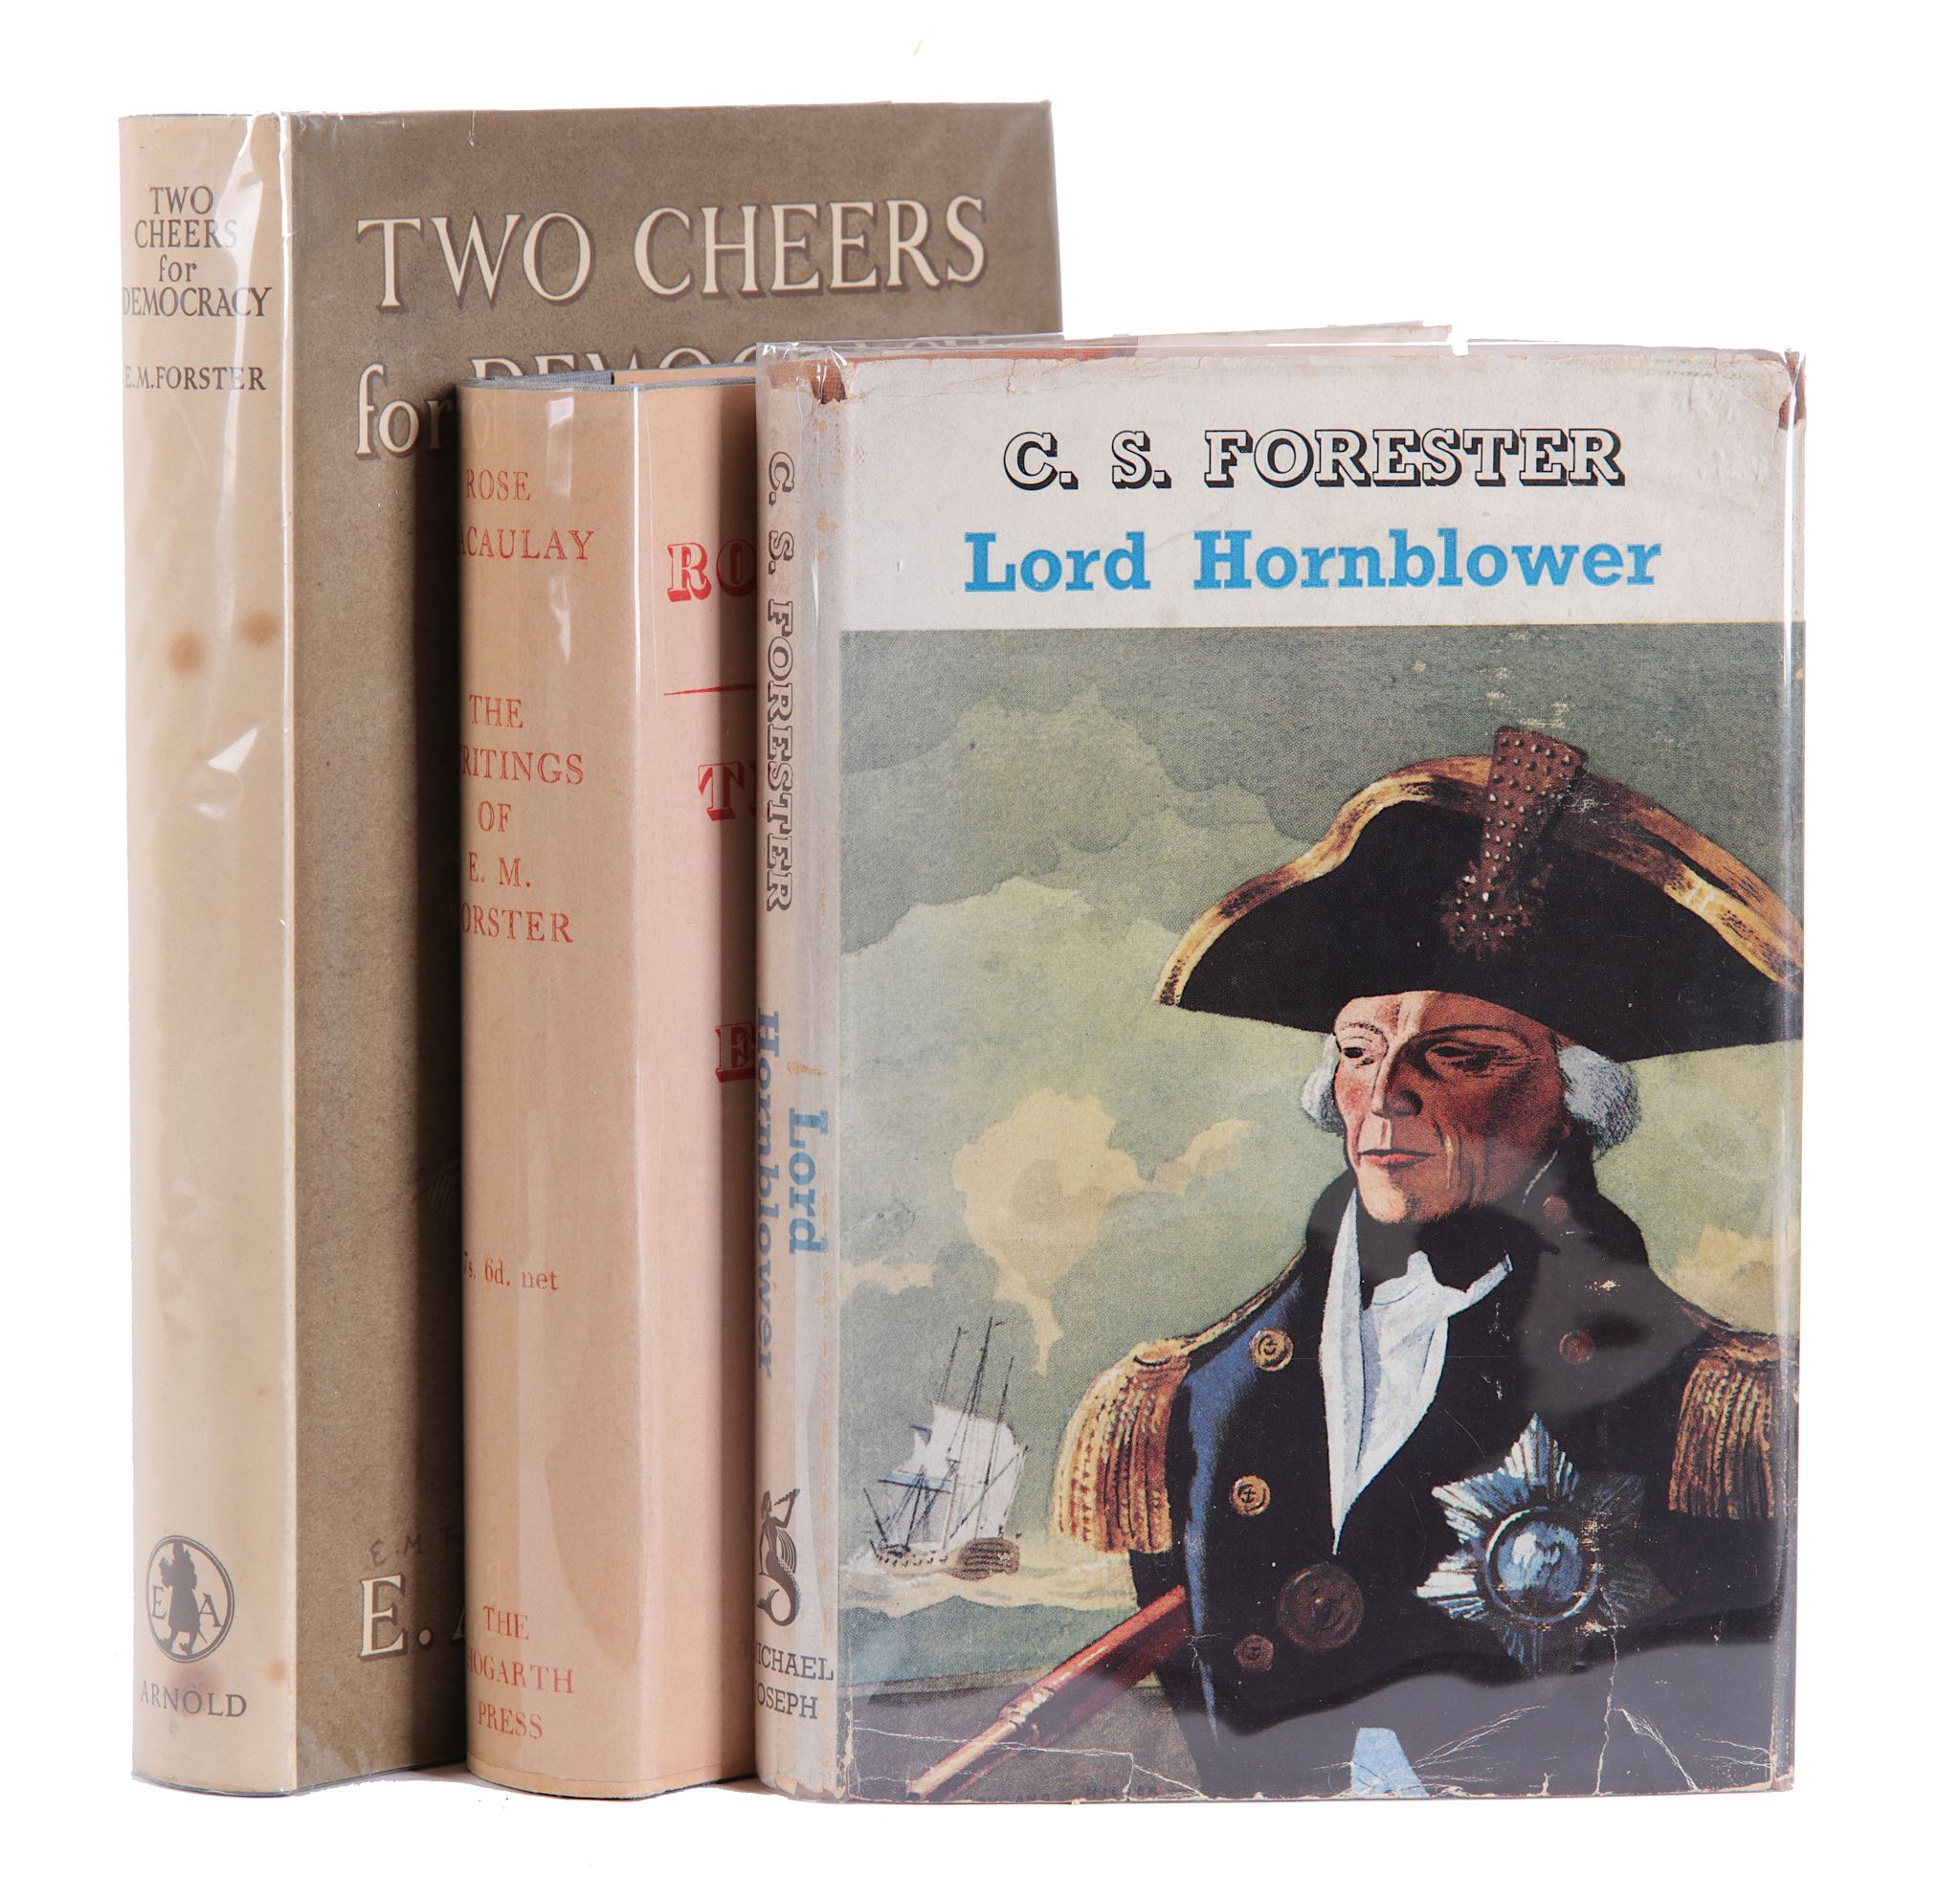 Forester (C. S.) Lord Hornblower, FIRST EDITION, publishers orange cloth, original dust-jacket,